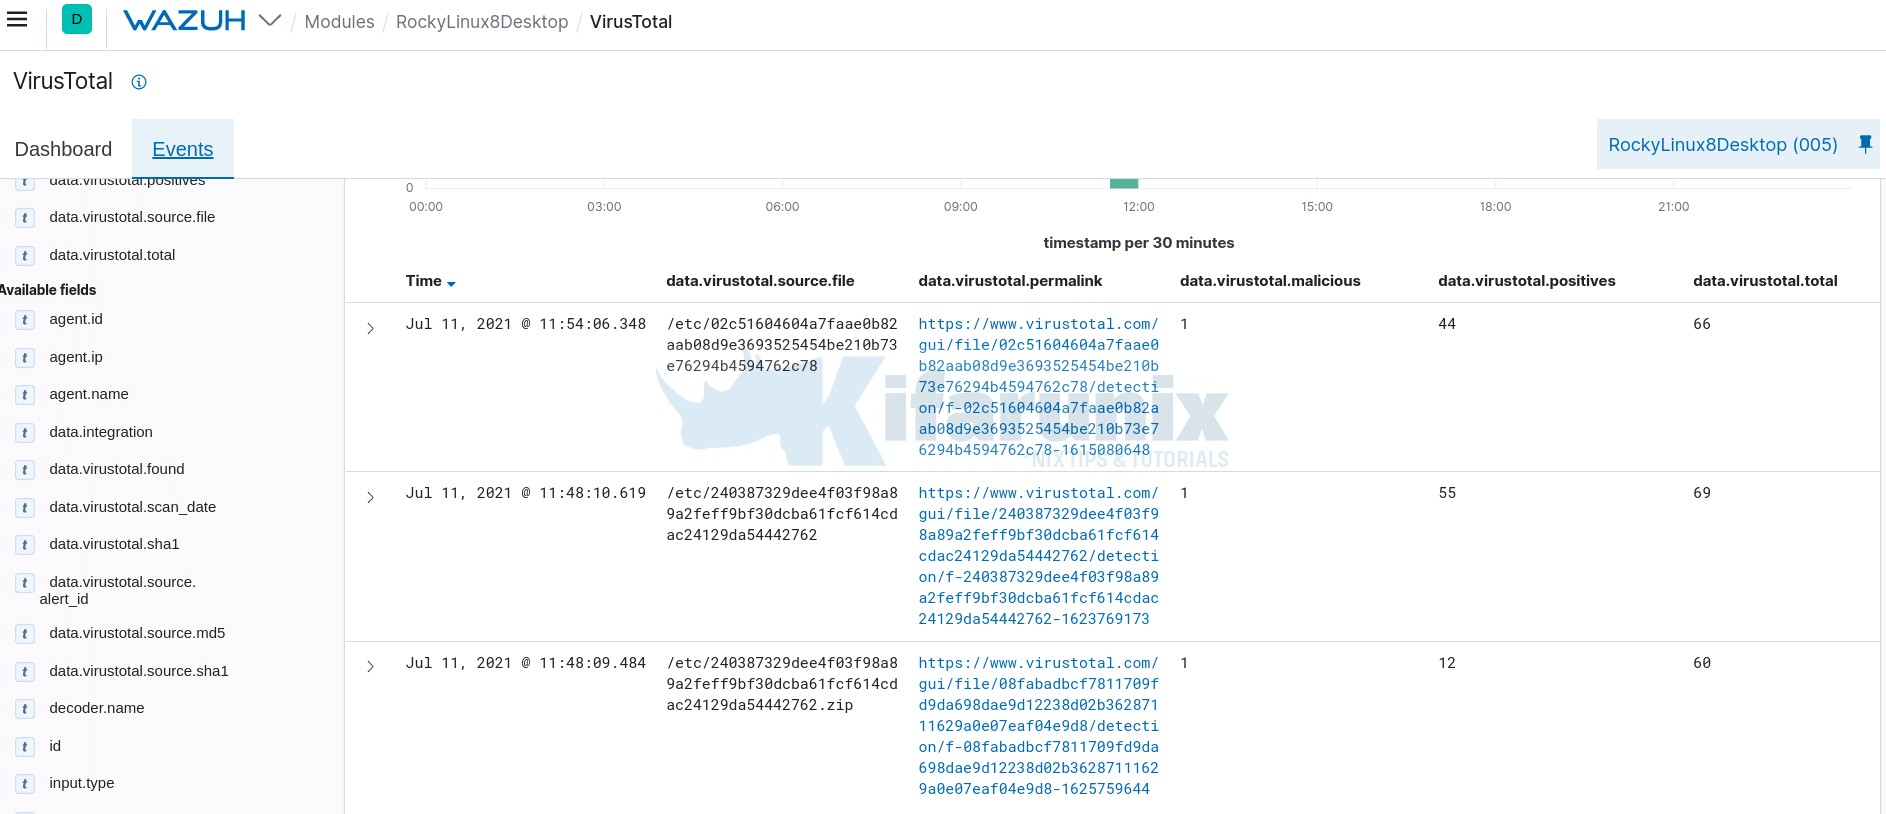 Detecting Malicious Files with Wazuh and VirusTotal